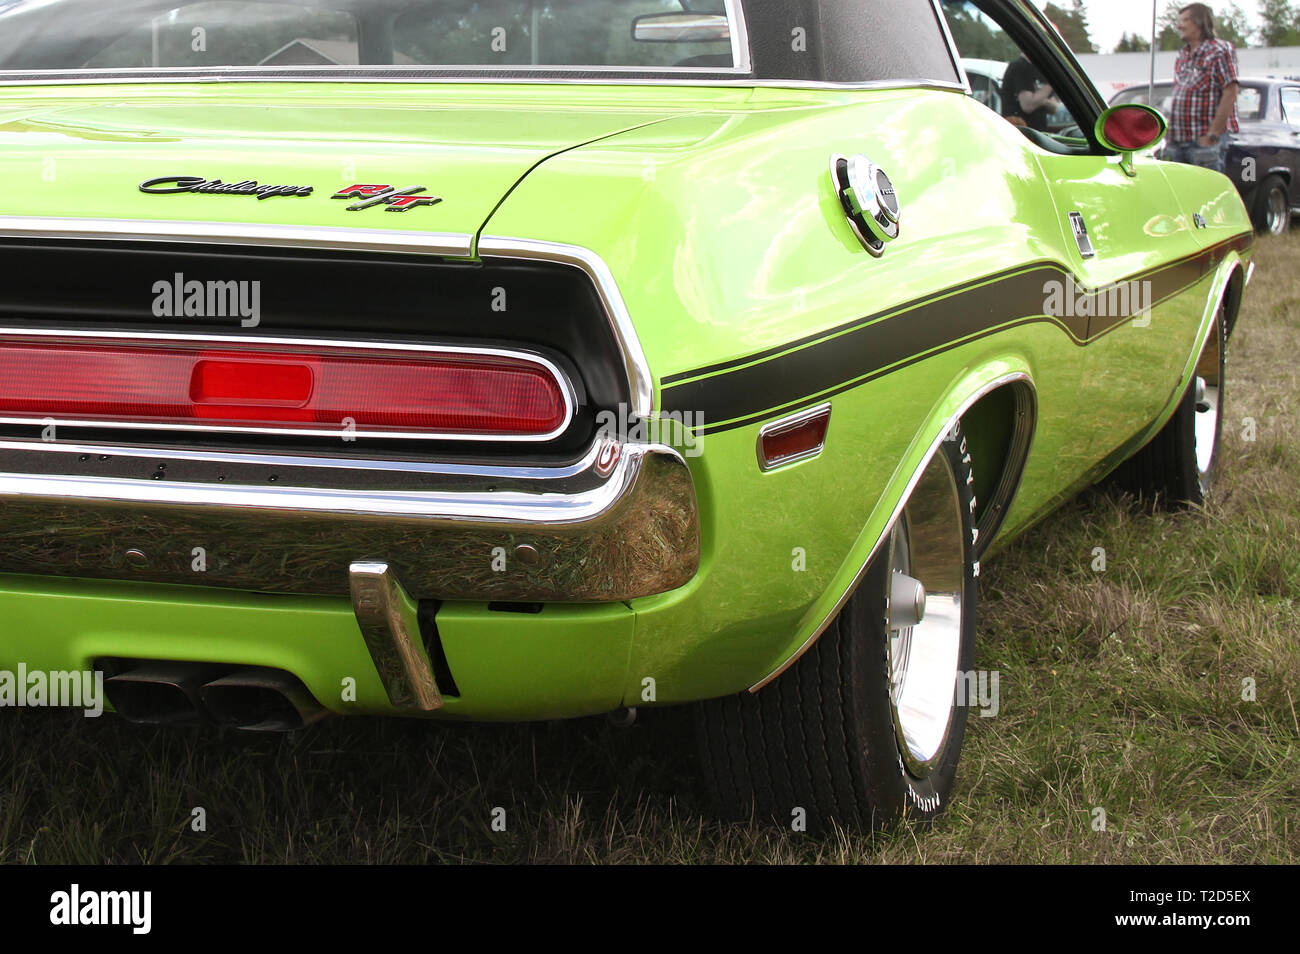 Green Dodge Challenger R T At Pick Nick 18 Classic Car Show In Forssa Finland 05 08 18 Forssa Finland Stock Photo Alamy